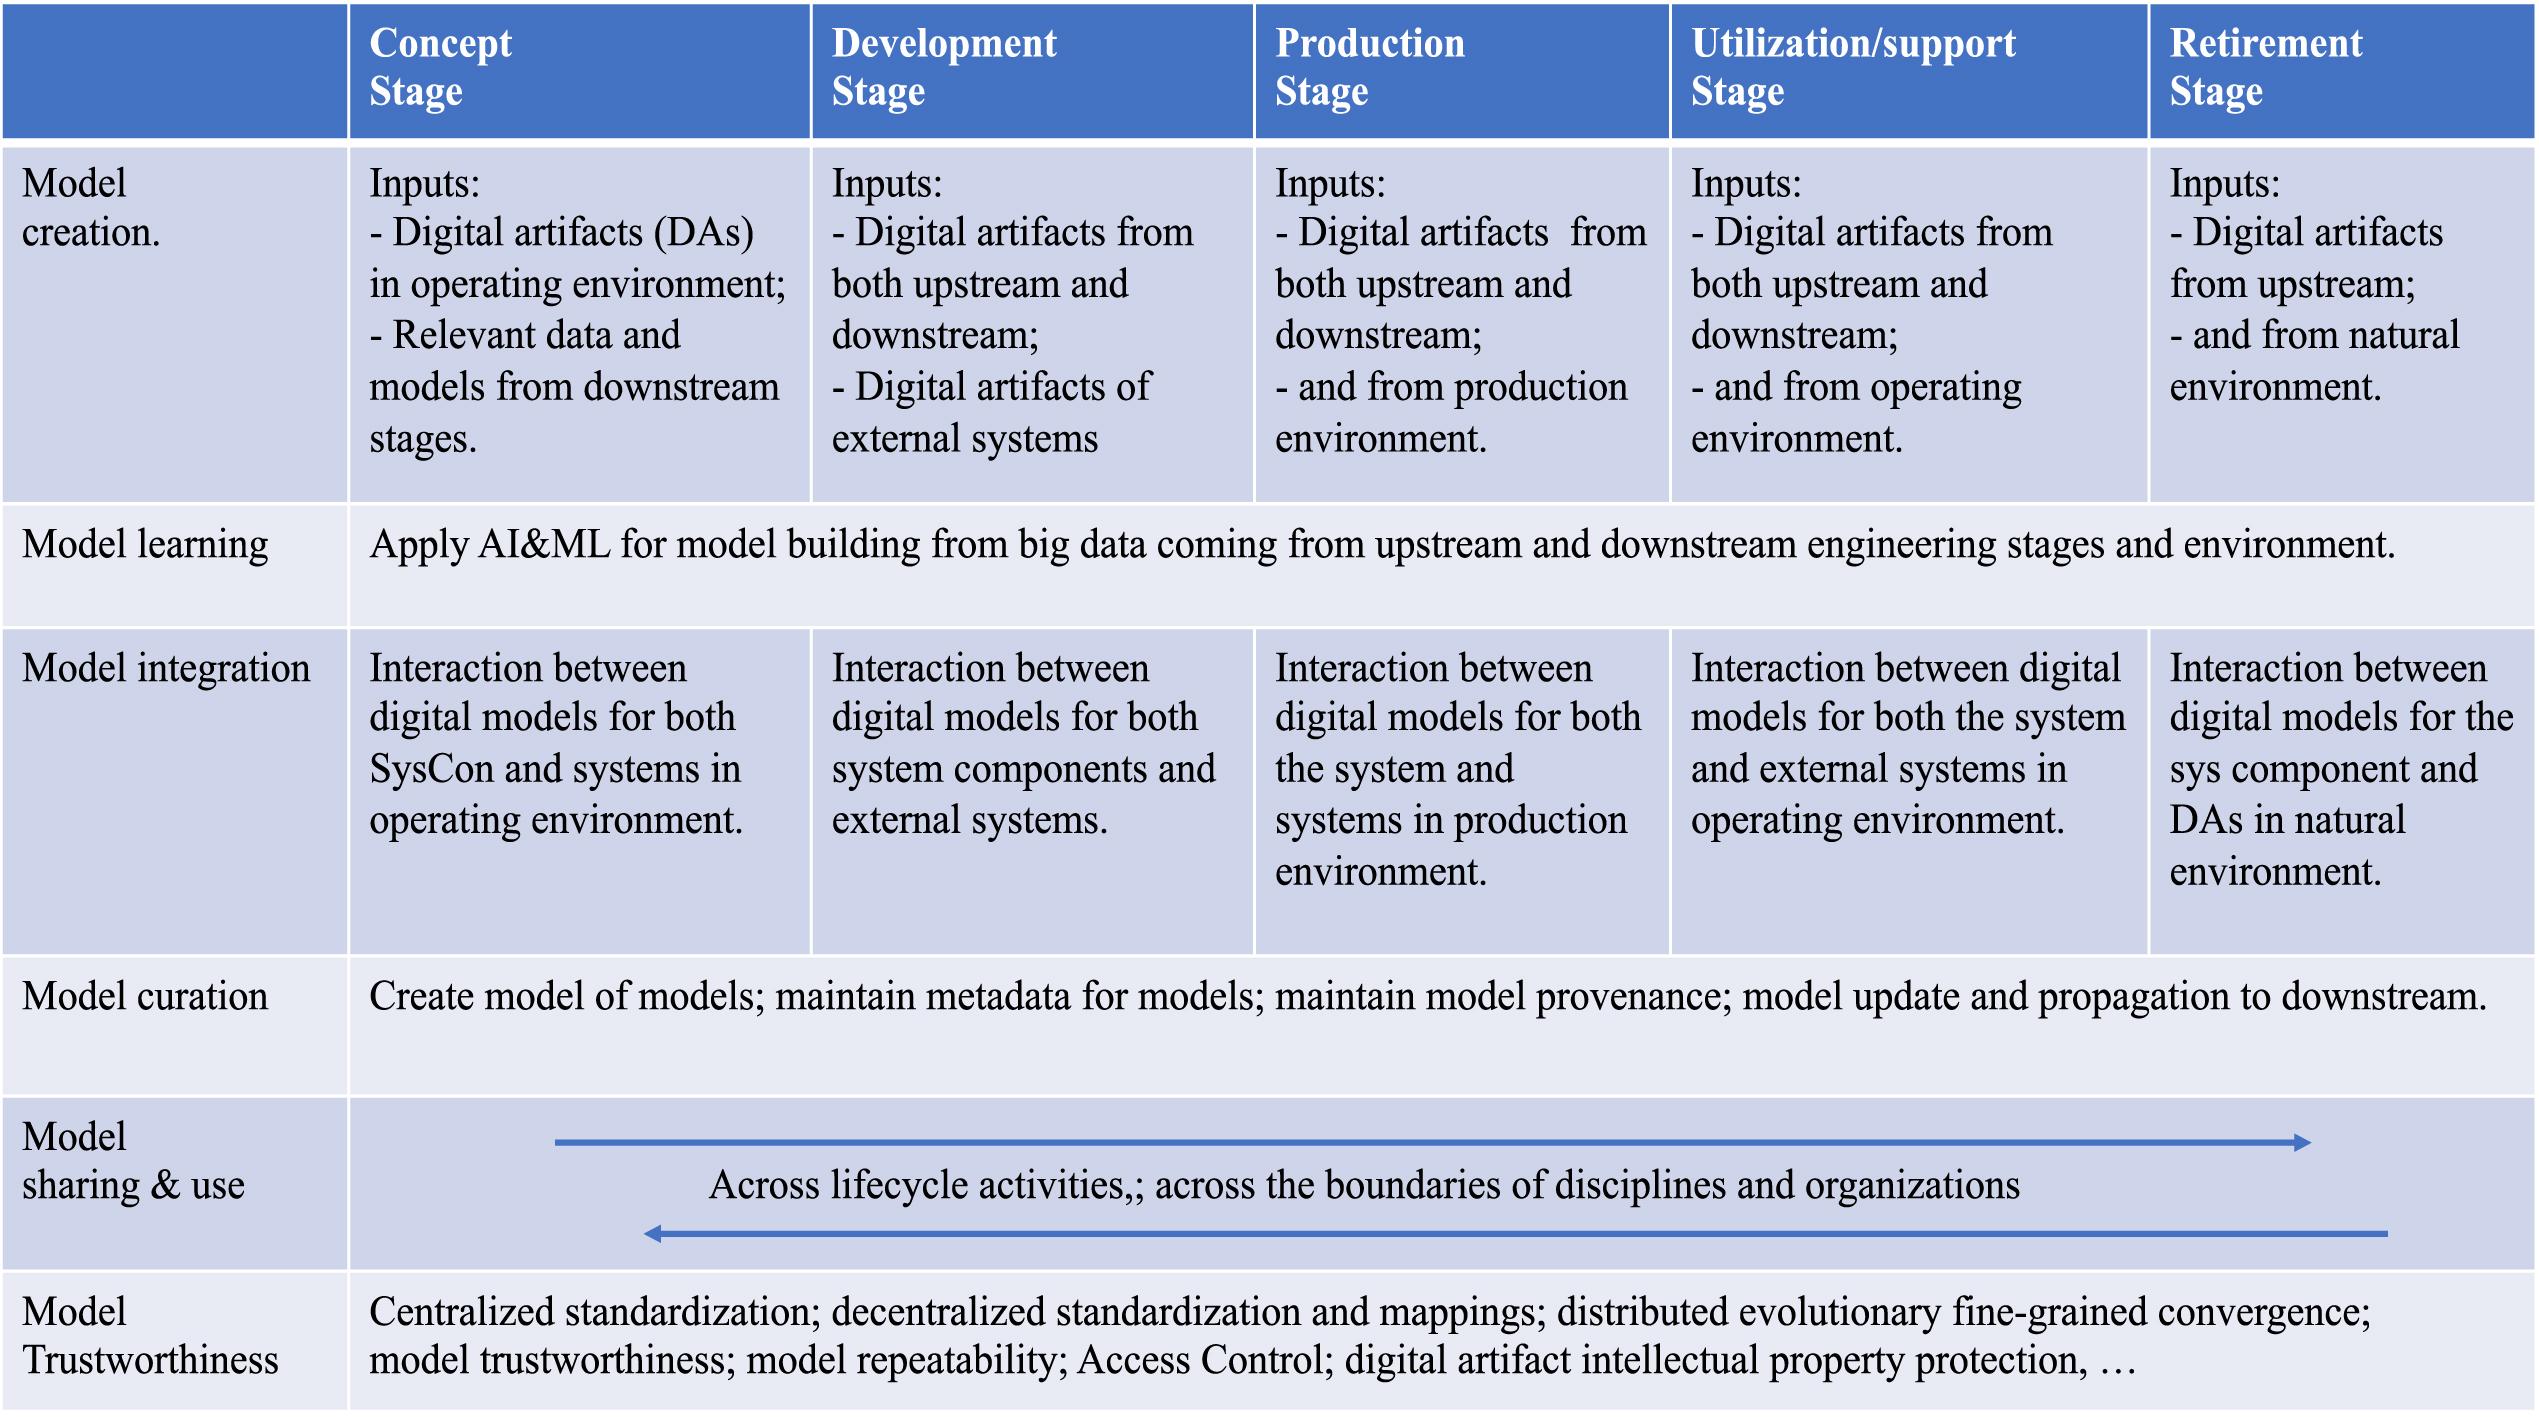 Model perspective: operations in the digital engineering lifecycle (Huang et al., 2020).